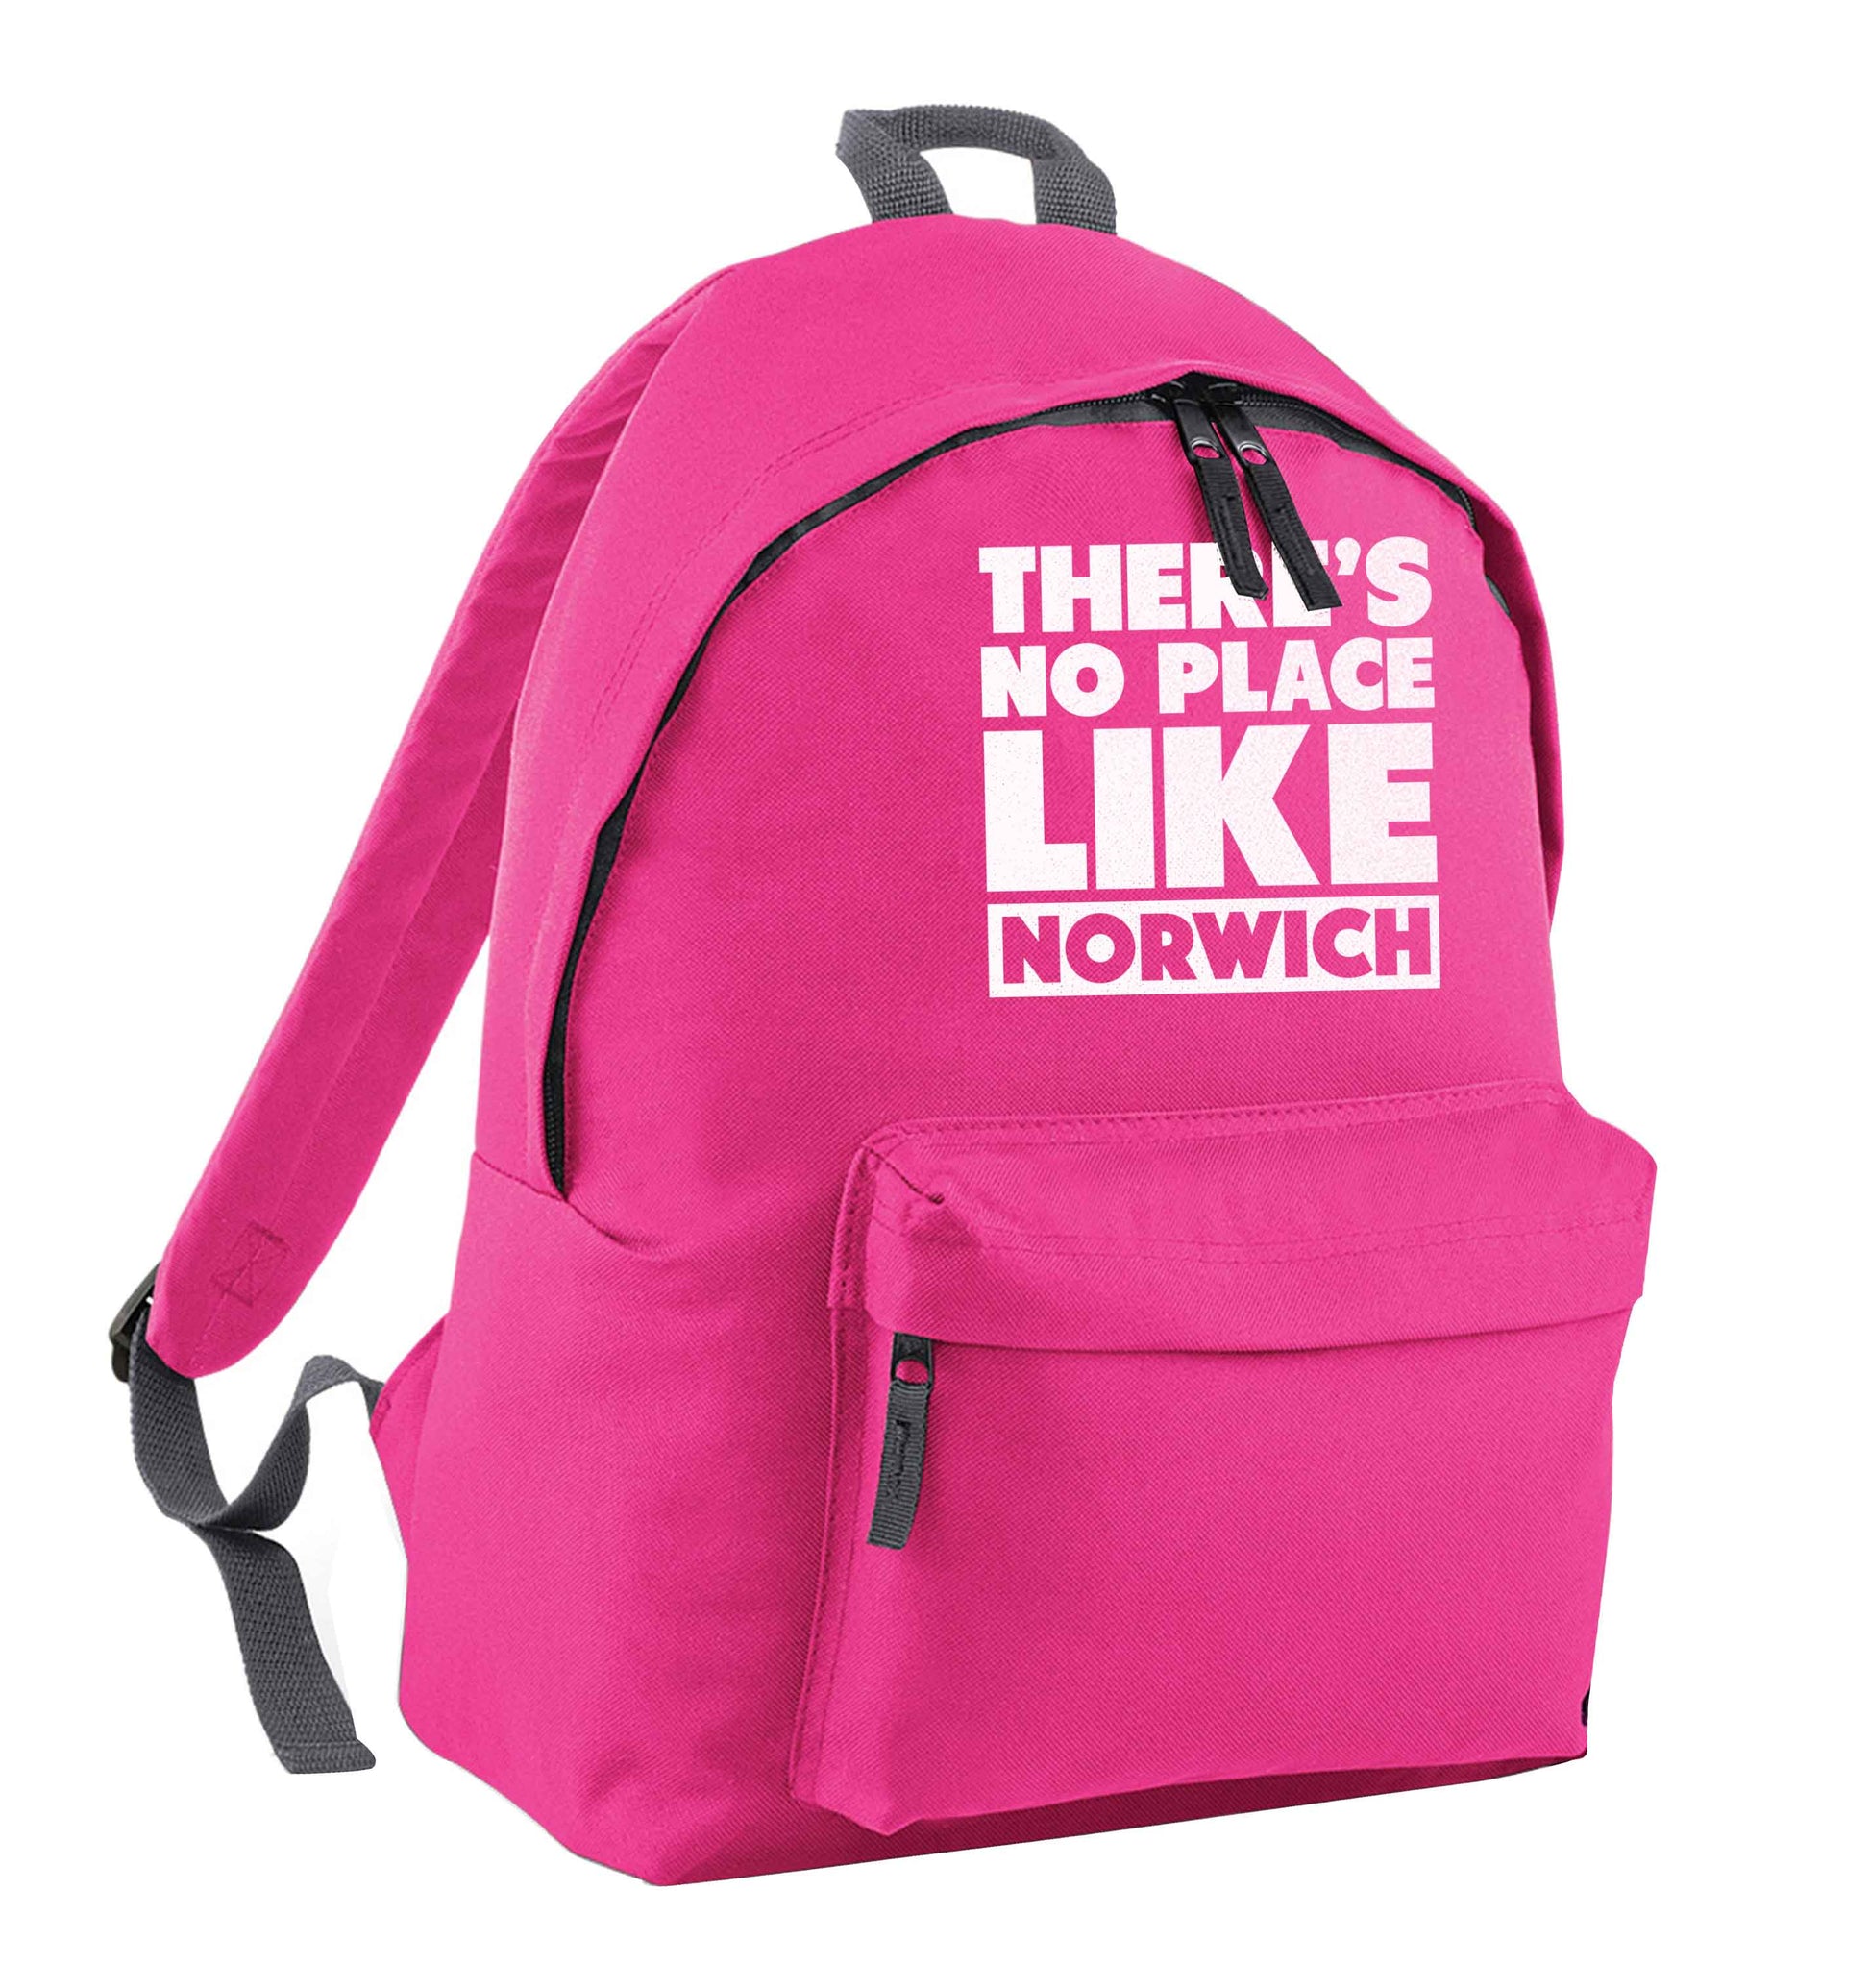 There's no place like Norwich pink children's backpack